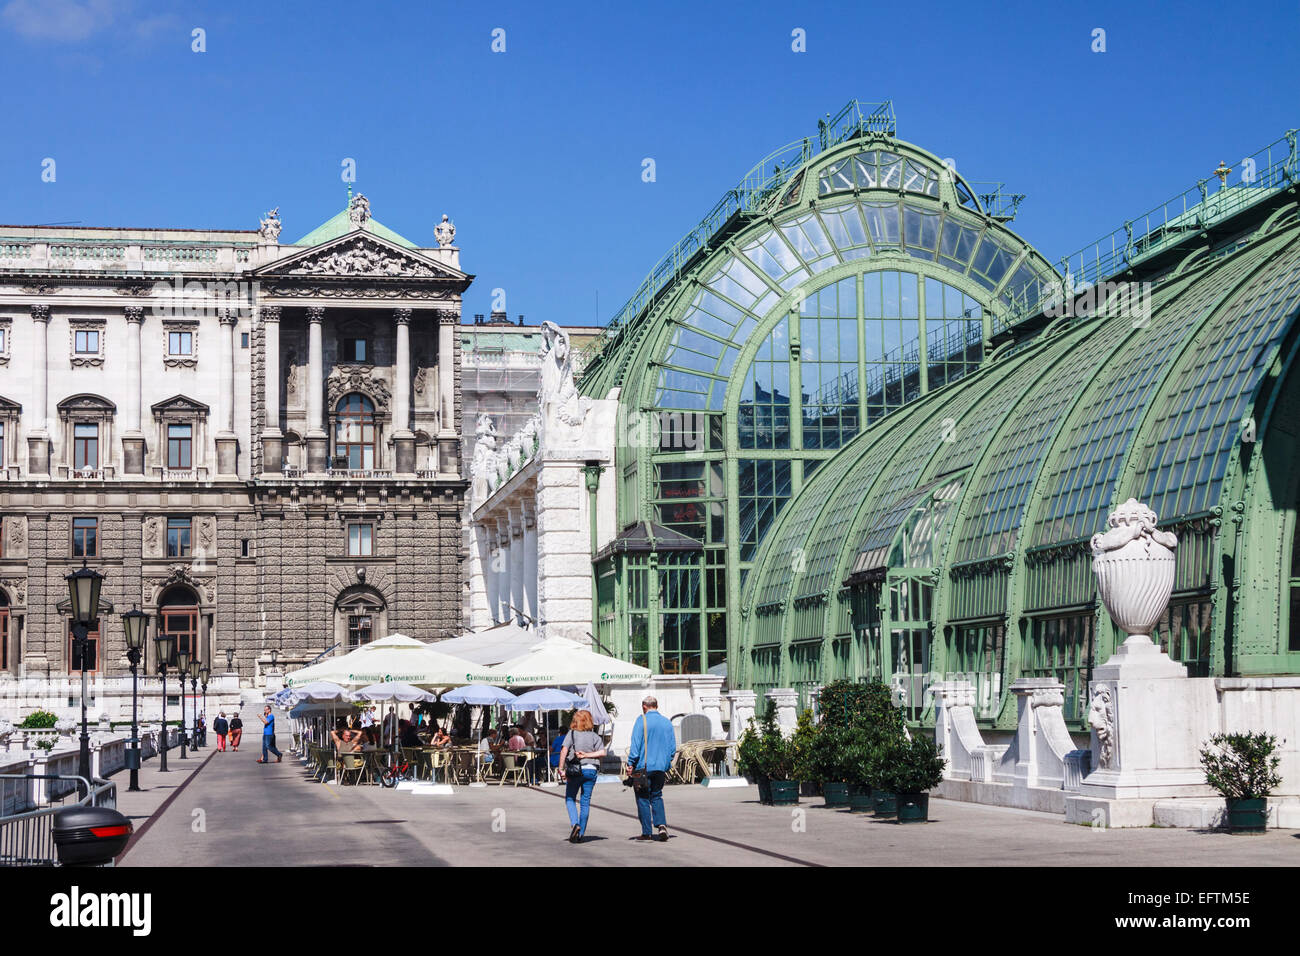 Palmenhaus, a magnificent glass palm house designed by Friedrich Ohmann in the Jugendstil style at the Burggarten park in Vienna Stock Photo